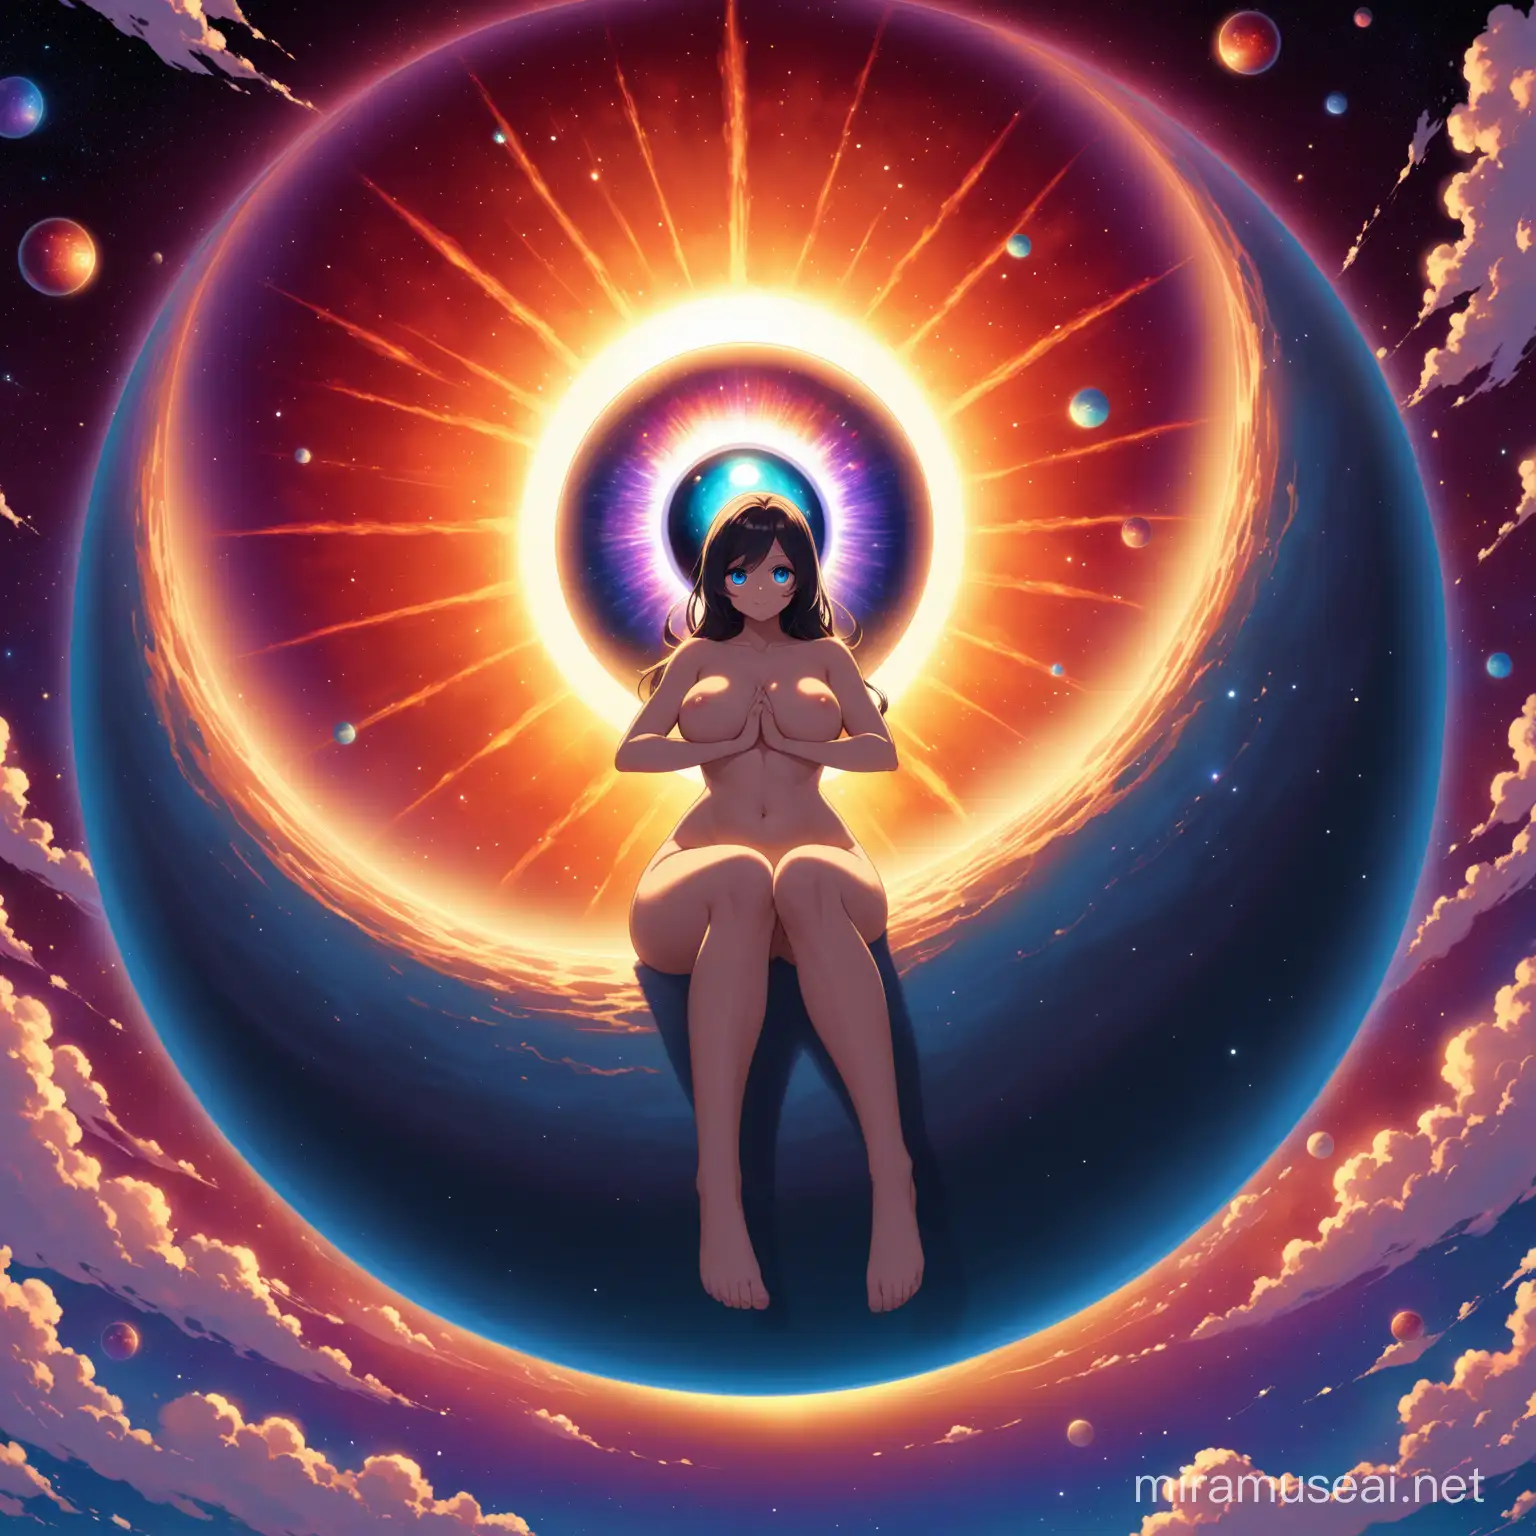 A naked big breasted woman sitting with her legs crossed ontop of a giant floating eyeball, sunset background, in space 